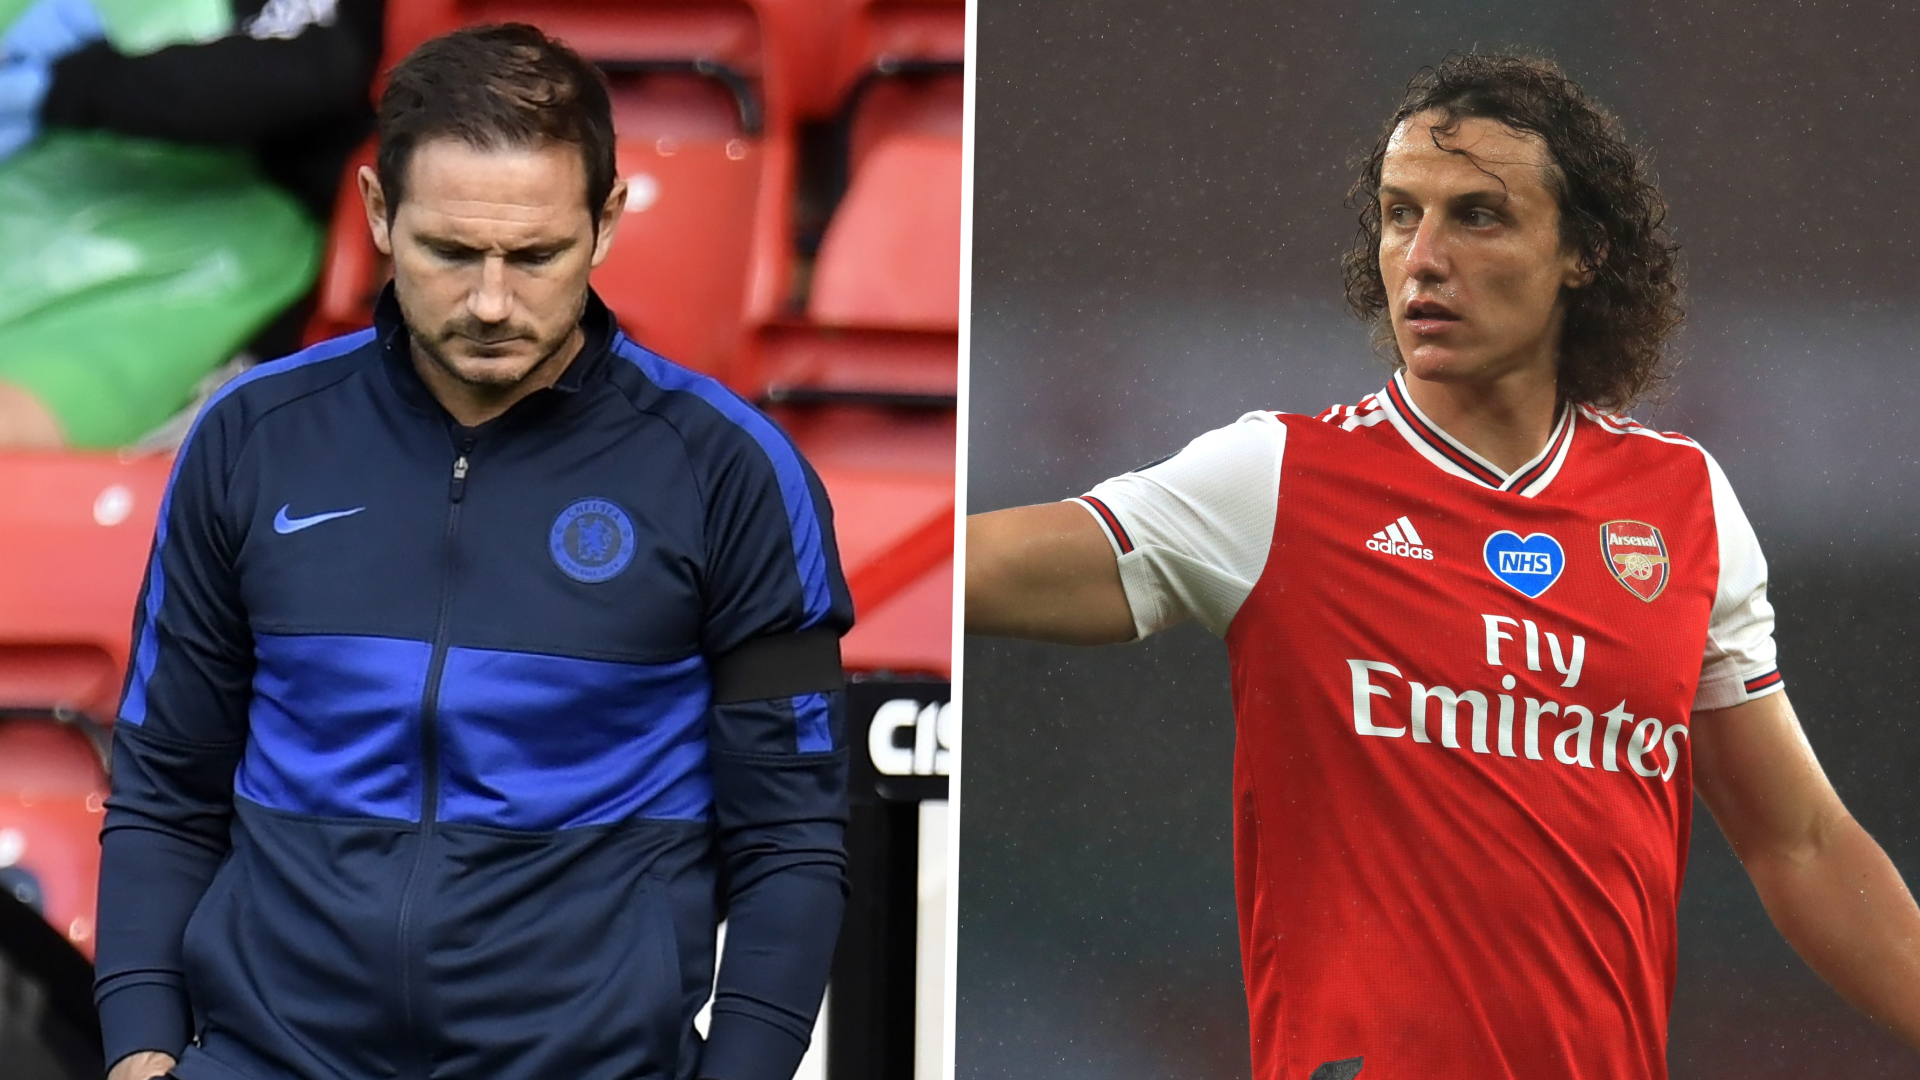 'What I have for David is a real respect' - Chelsea boss Lampard not targeting Luiz as Arsenal weak link